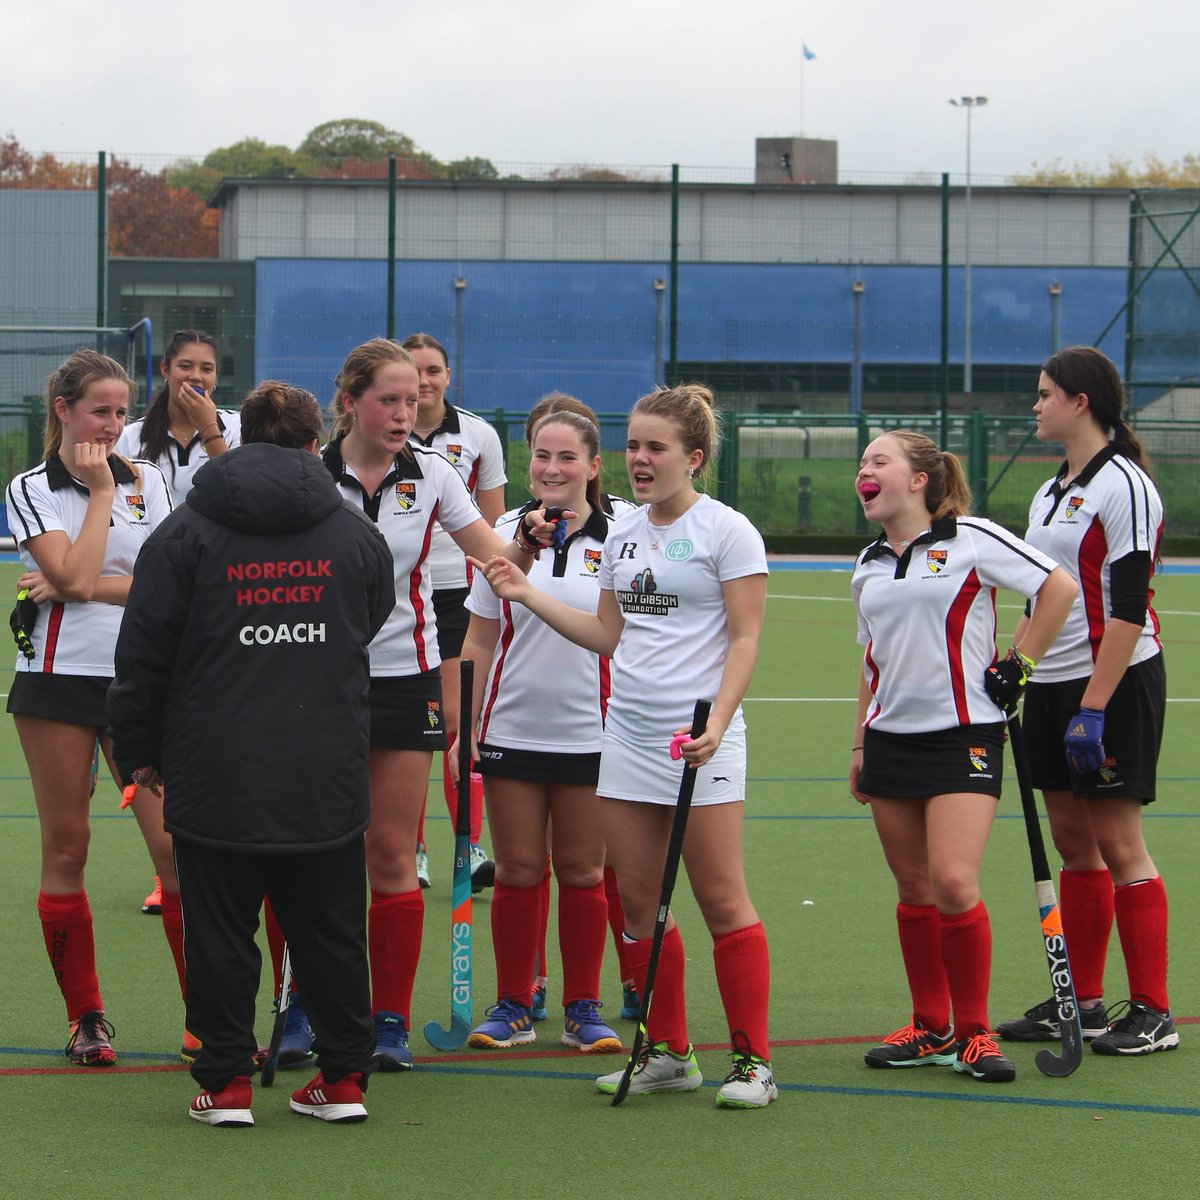 Tag your coach and hockey club in the comments and let's celebrate the fantastic efforts they put in week in week out! @_UKCoaching #nationalcoachingweek #thankyoucoach #hockeycoach